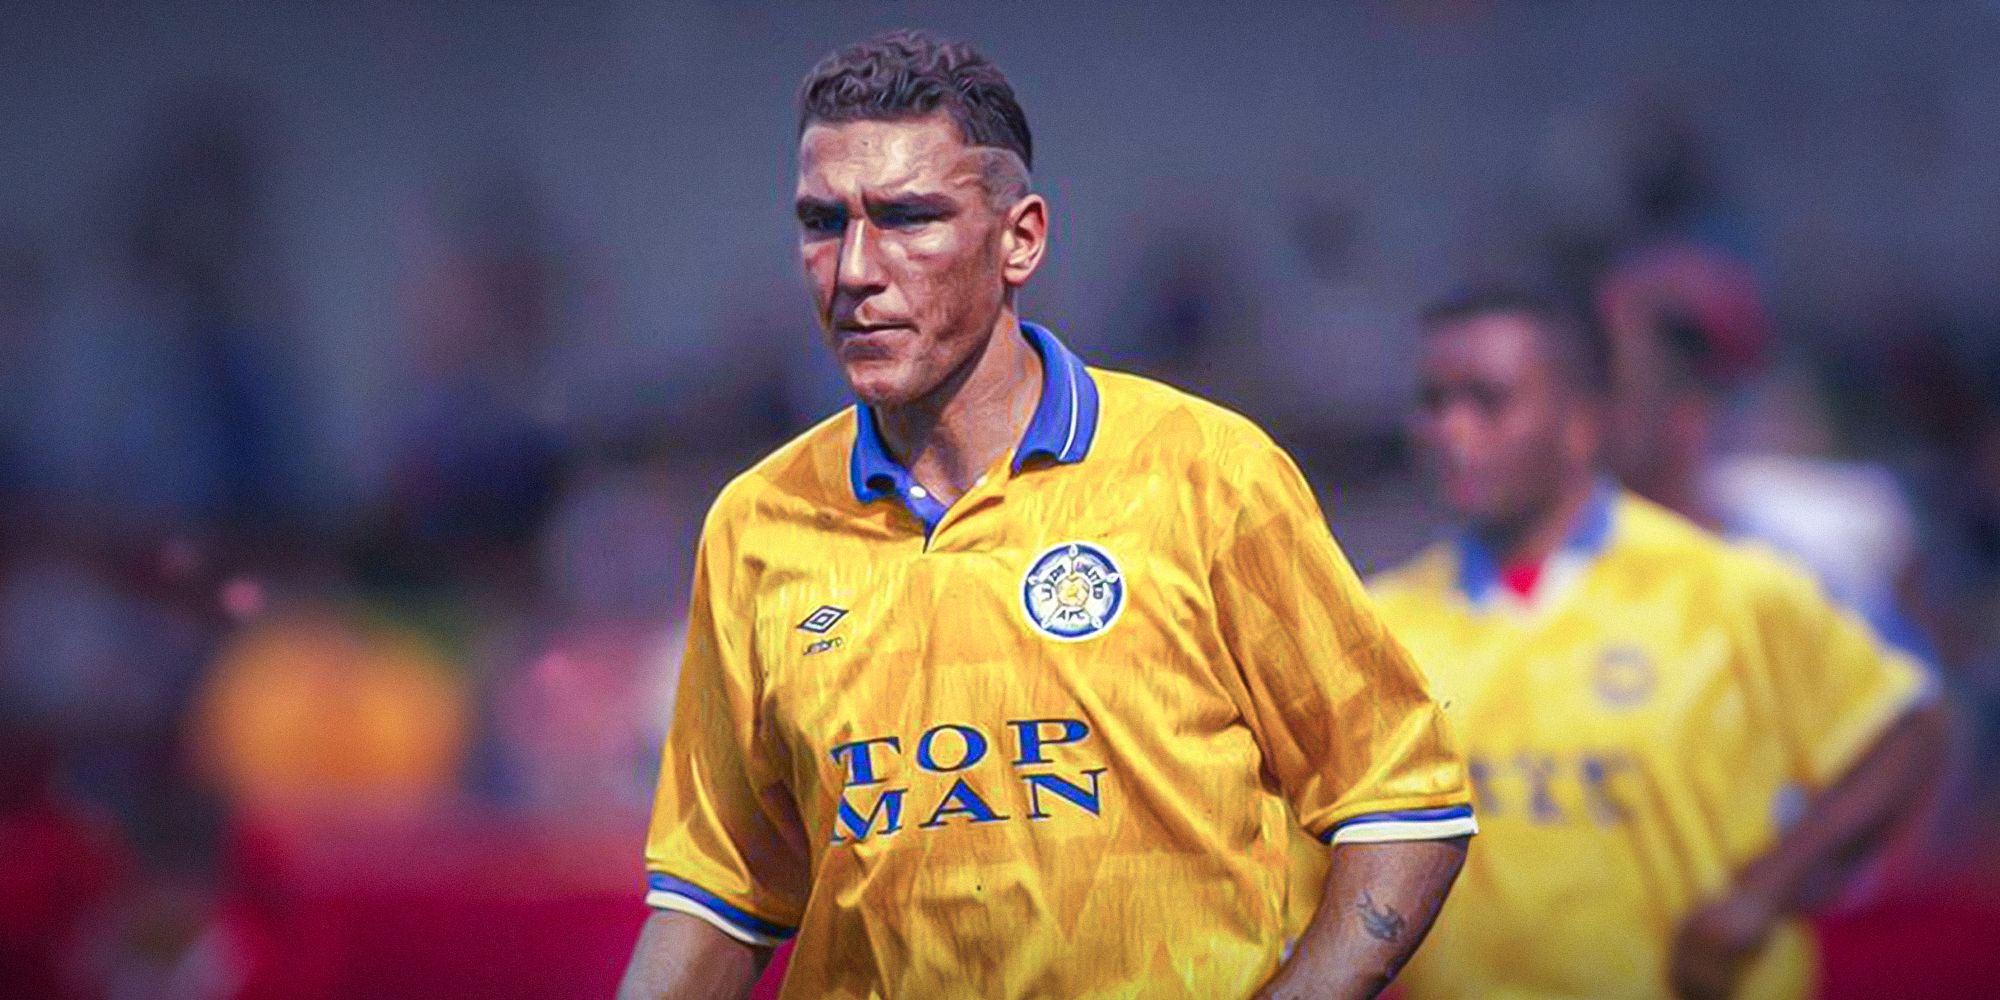 Vinnie Jones explained why he took out 5-year-old Leeds mascot before game